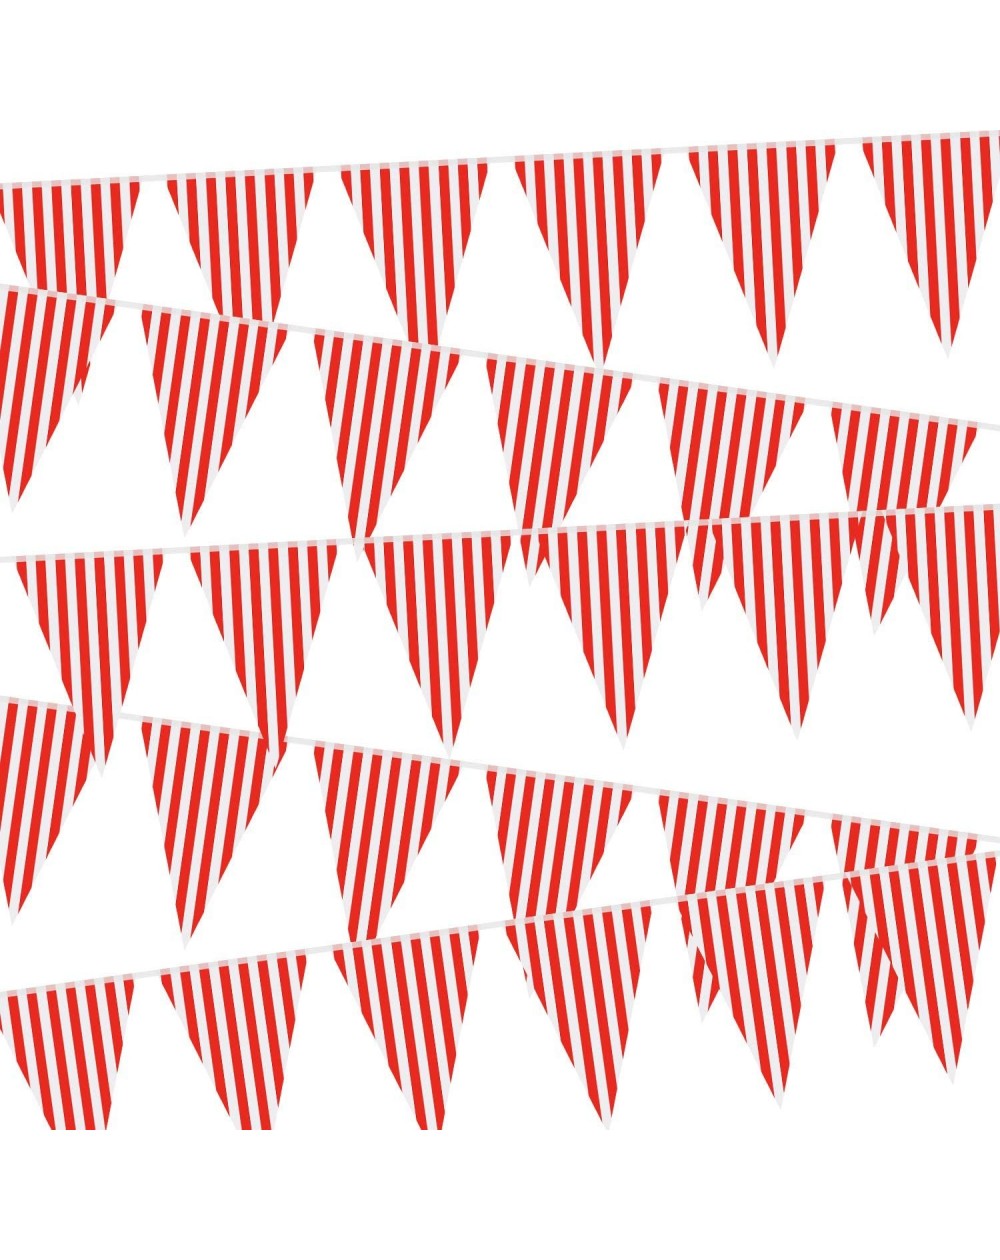 Banners 5 Packs Carnival Circus Party Decorations Supplies- Circus Carnival Bunting Banner- Red and White Pennant Banner Tria...